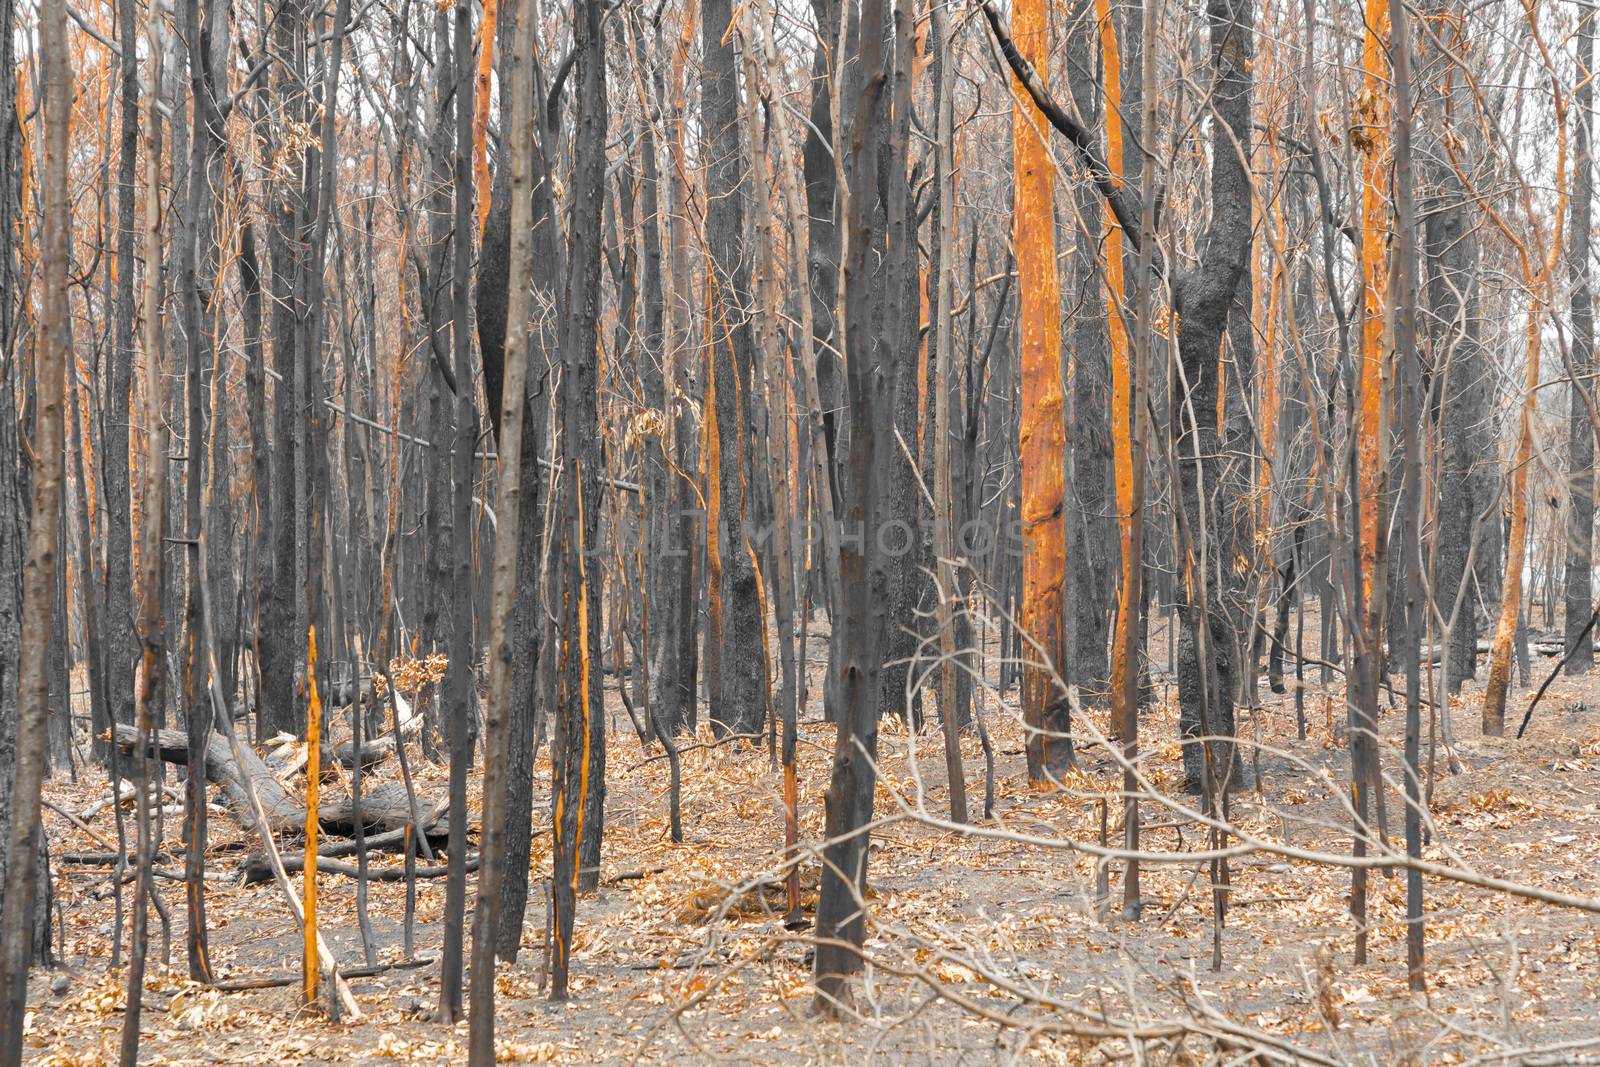 Gum trees burnt by severe bushfire in The Blue Mountains in Australia